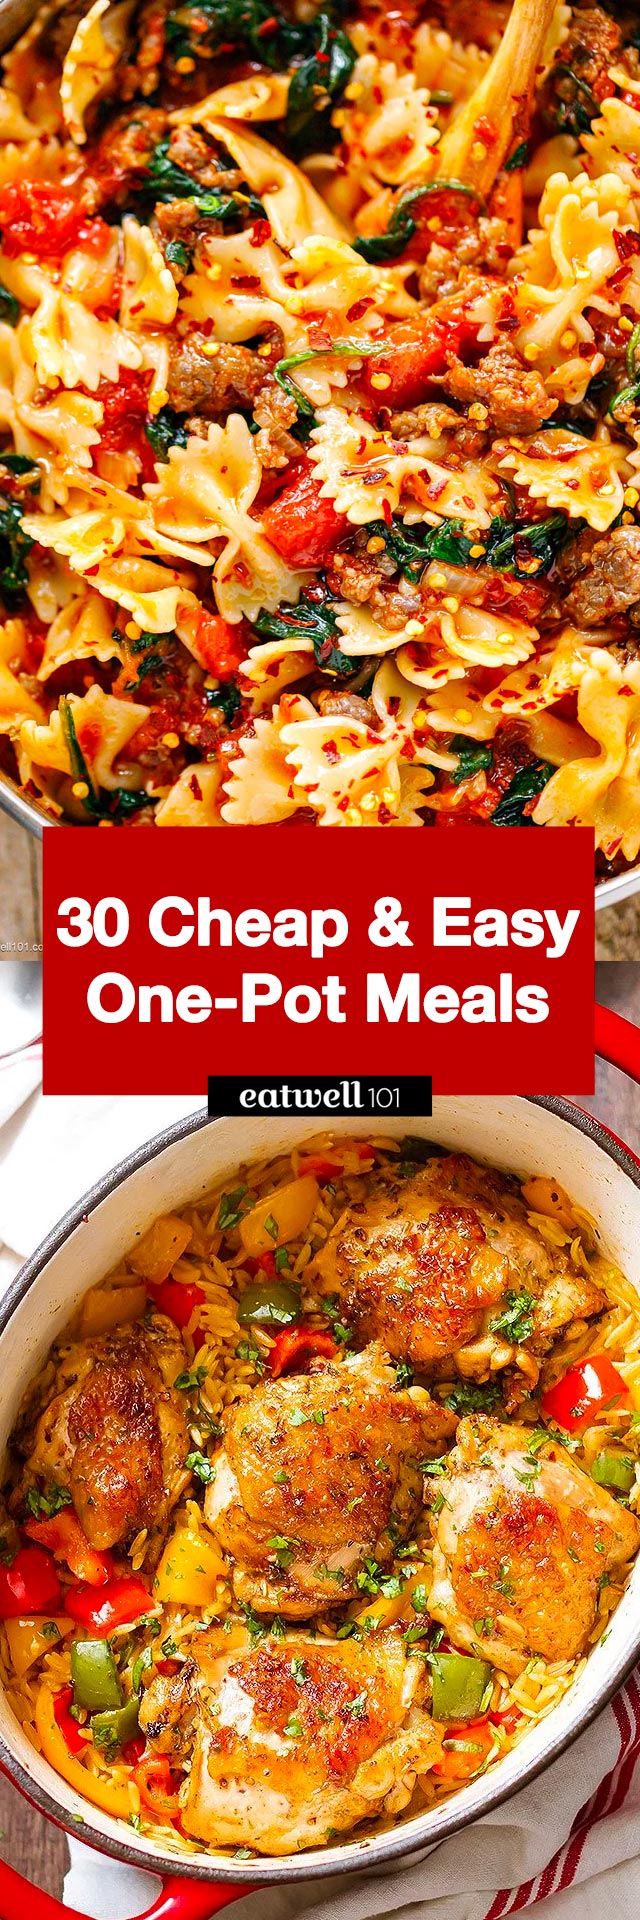 Cheap and easy recipes